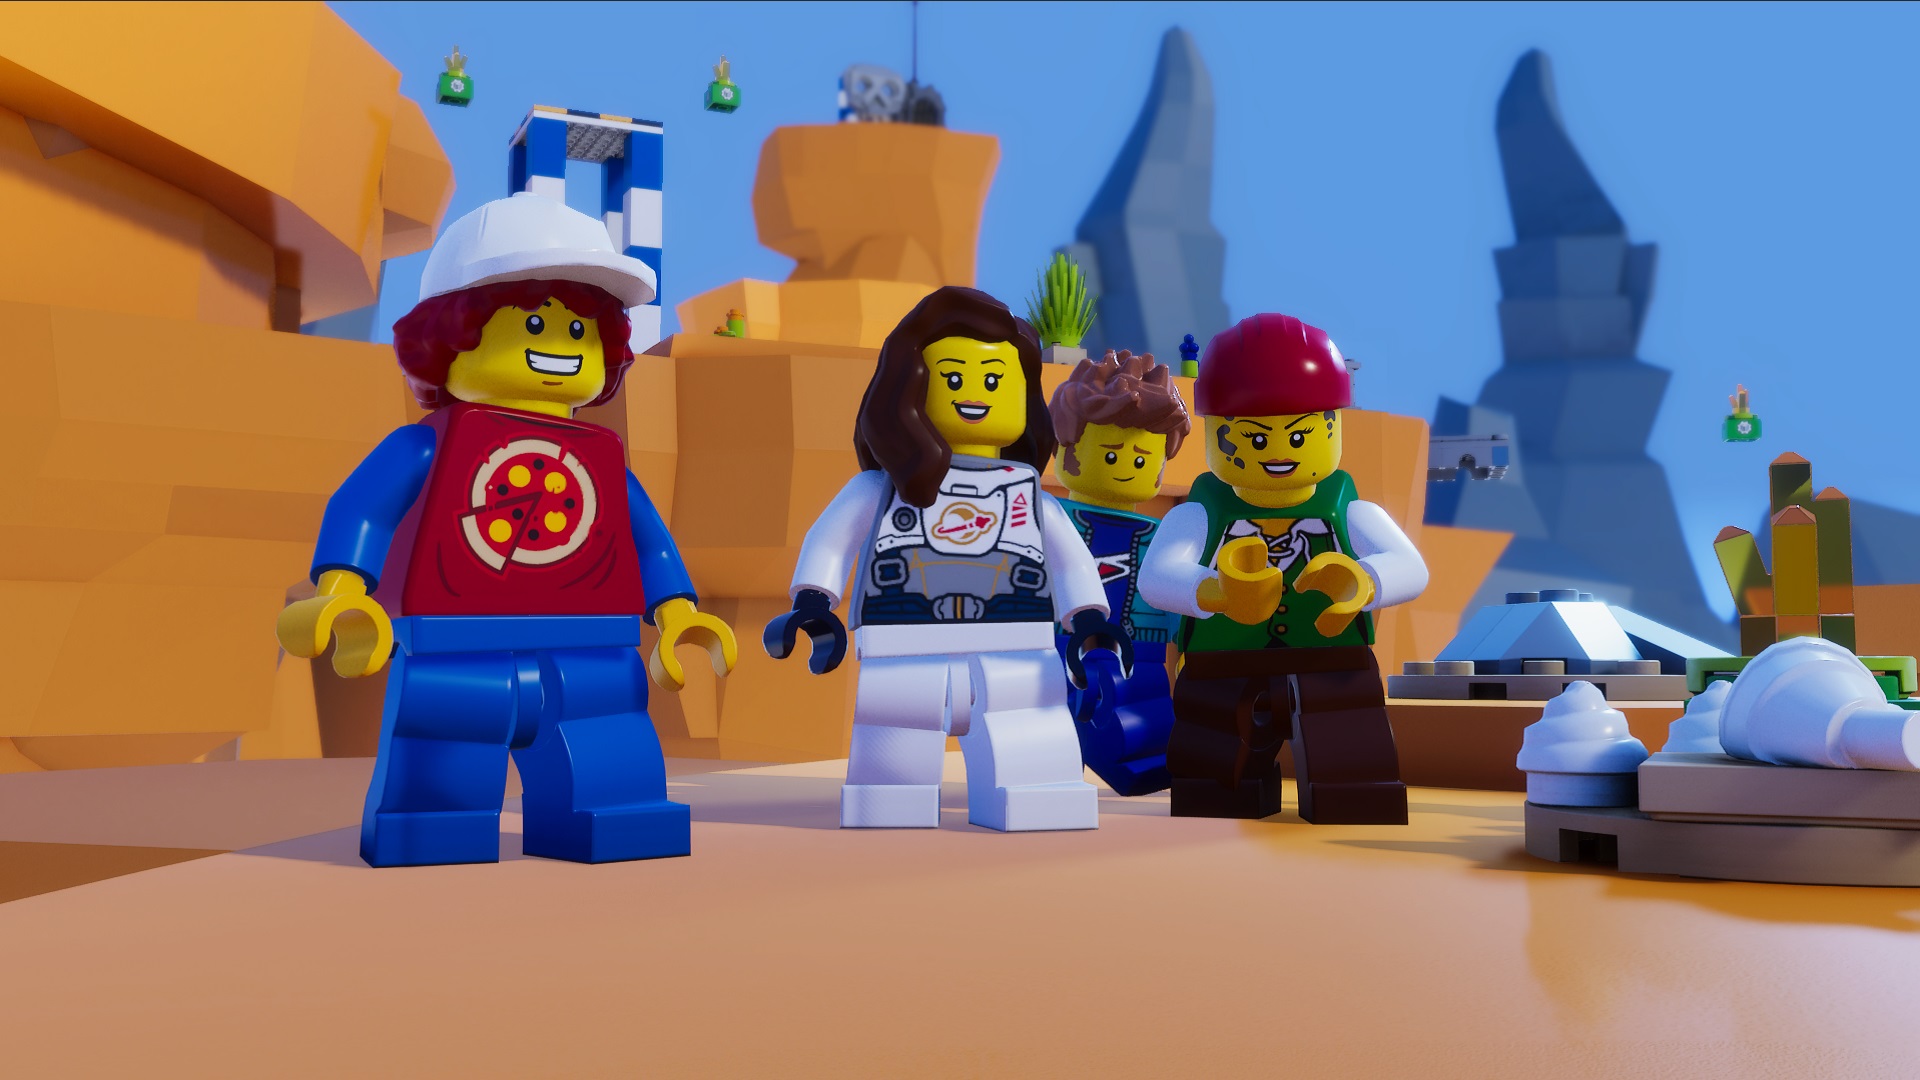 Lego Ideas has opened up contest for creators to submit Lego games made in Unity GamesRadar+